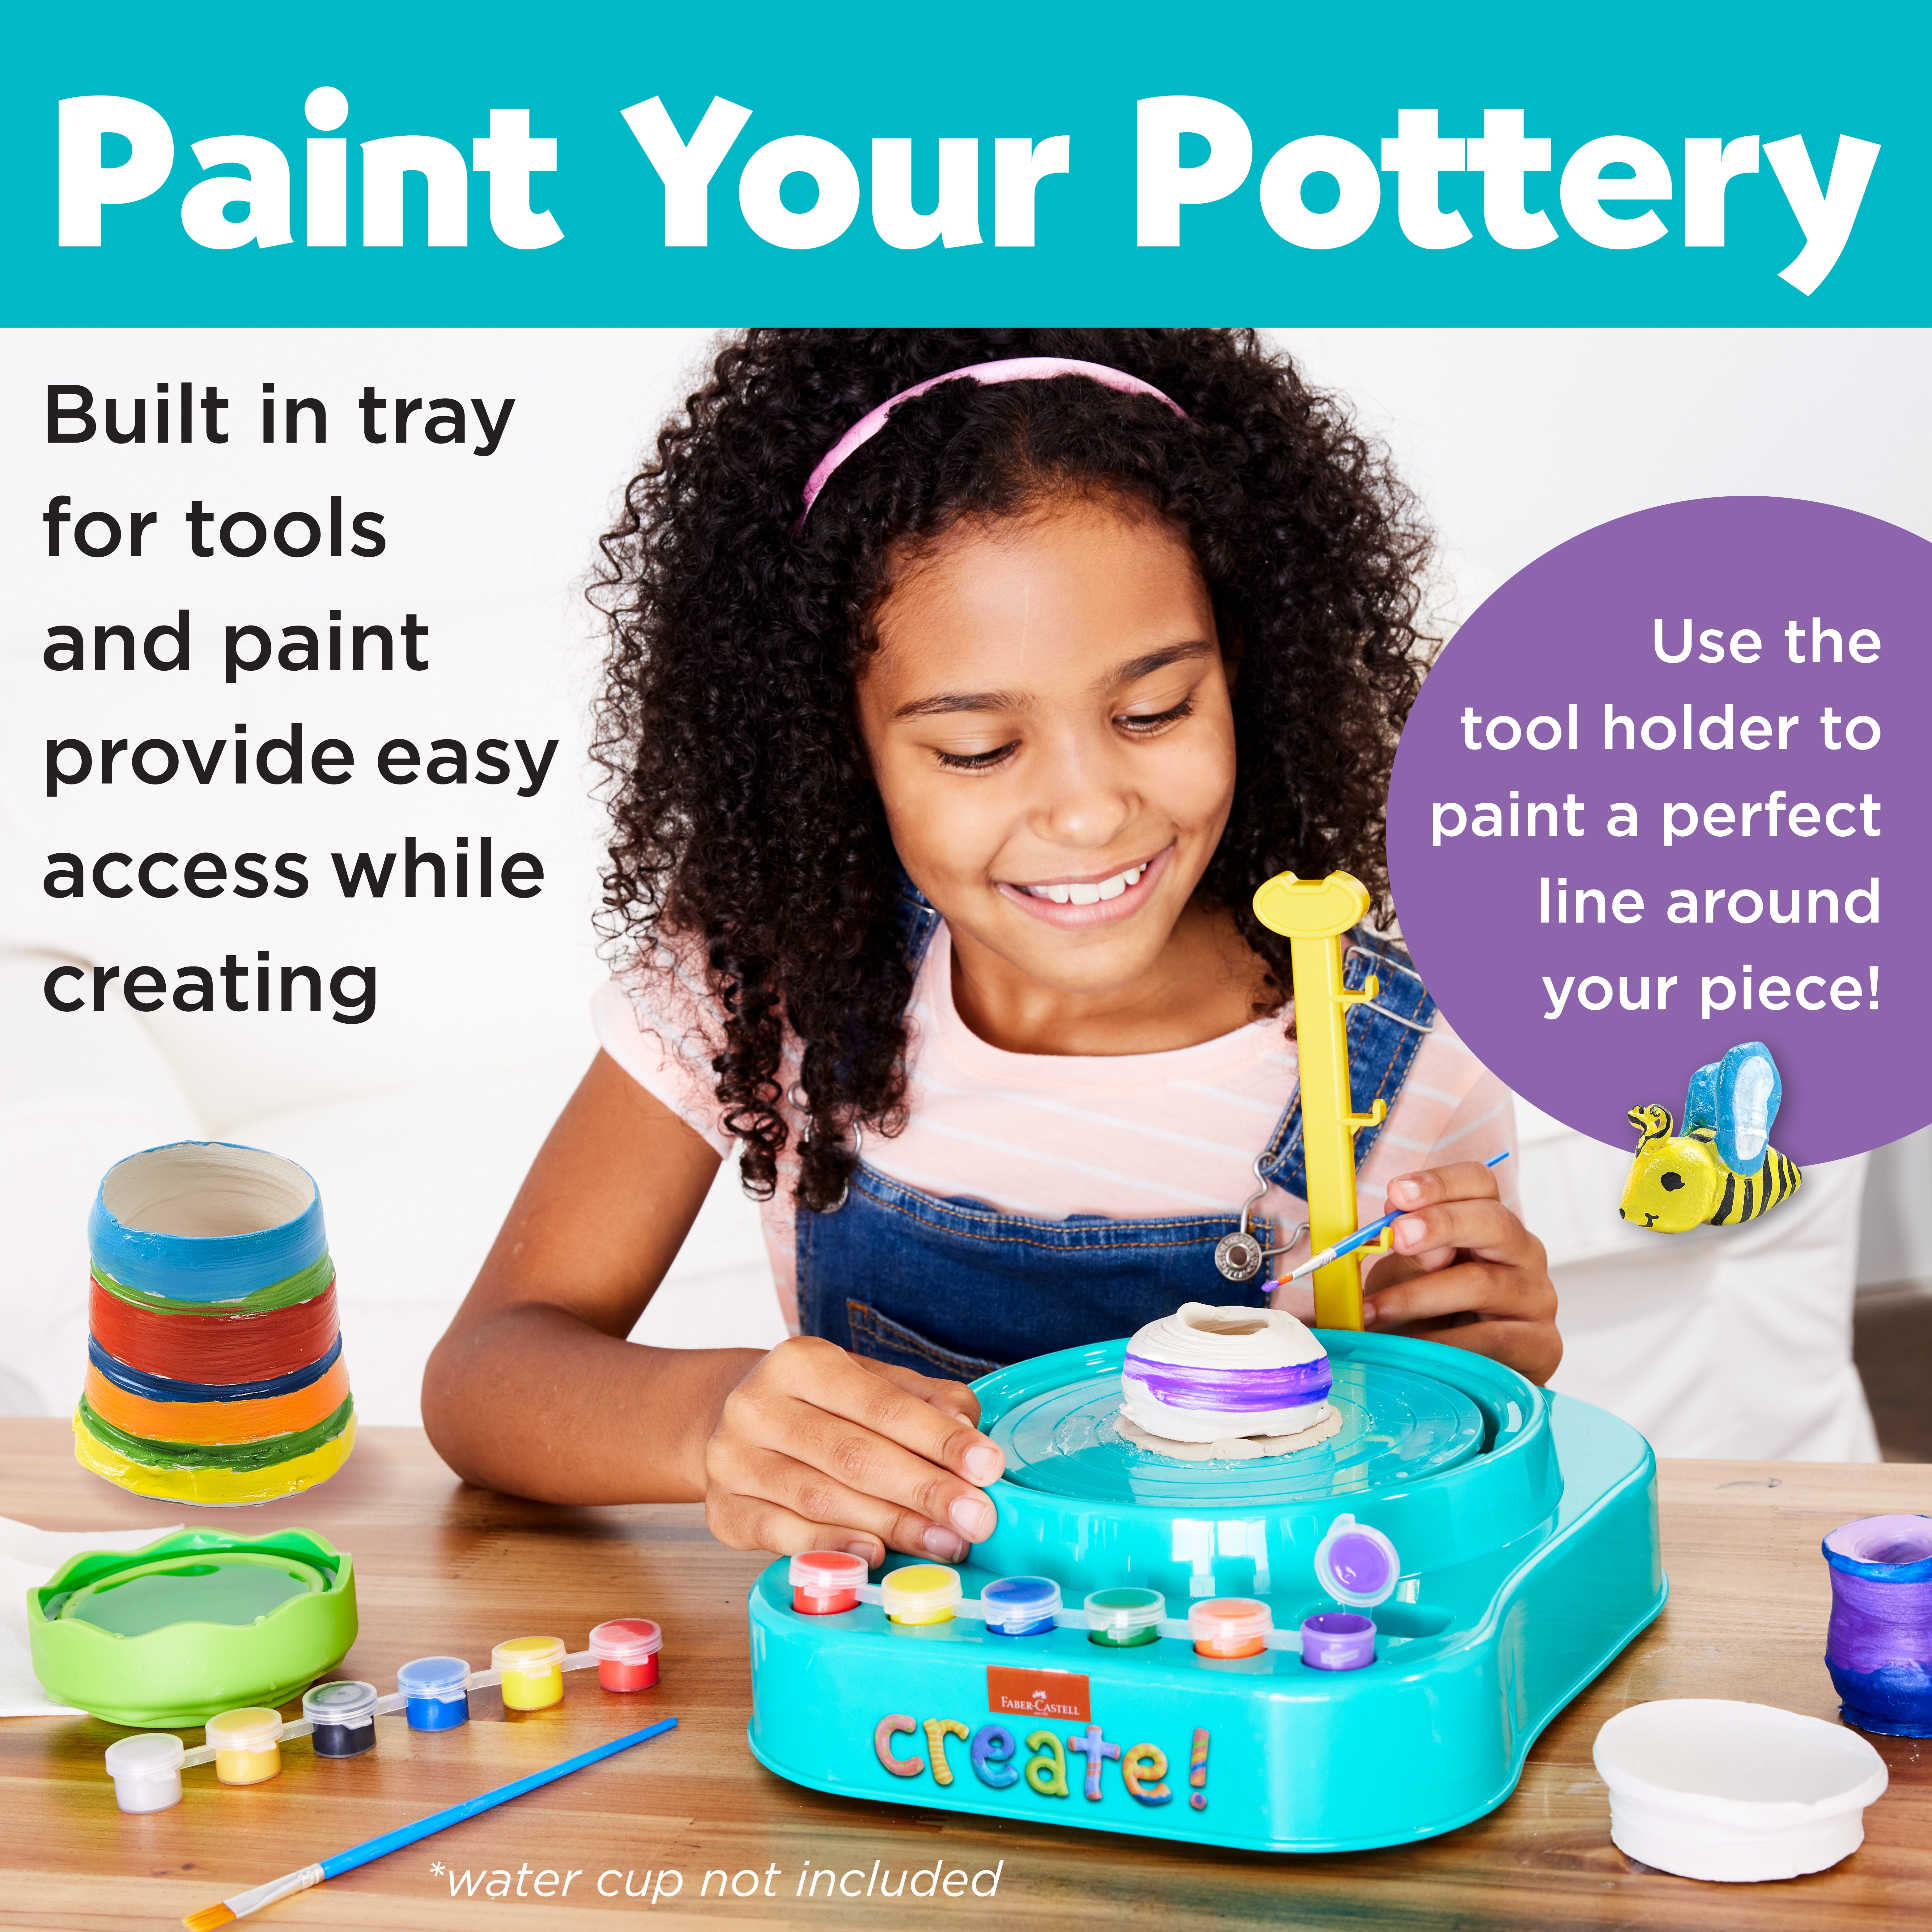 Faber-Castell Pottery Studio - Kids Pottery Wheel Kit for Ages 8+ Complete  Pottery Wheel and Painting Kit for Beginners 3 lbs of Sculpting Clay Blue